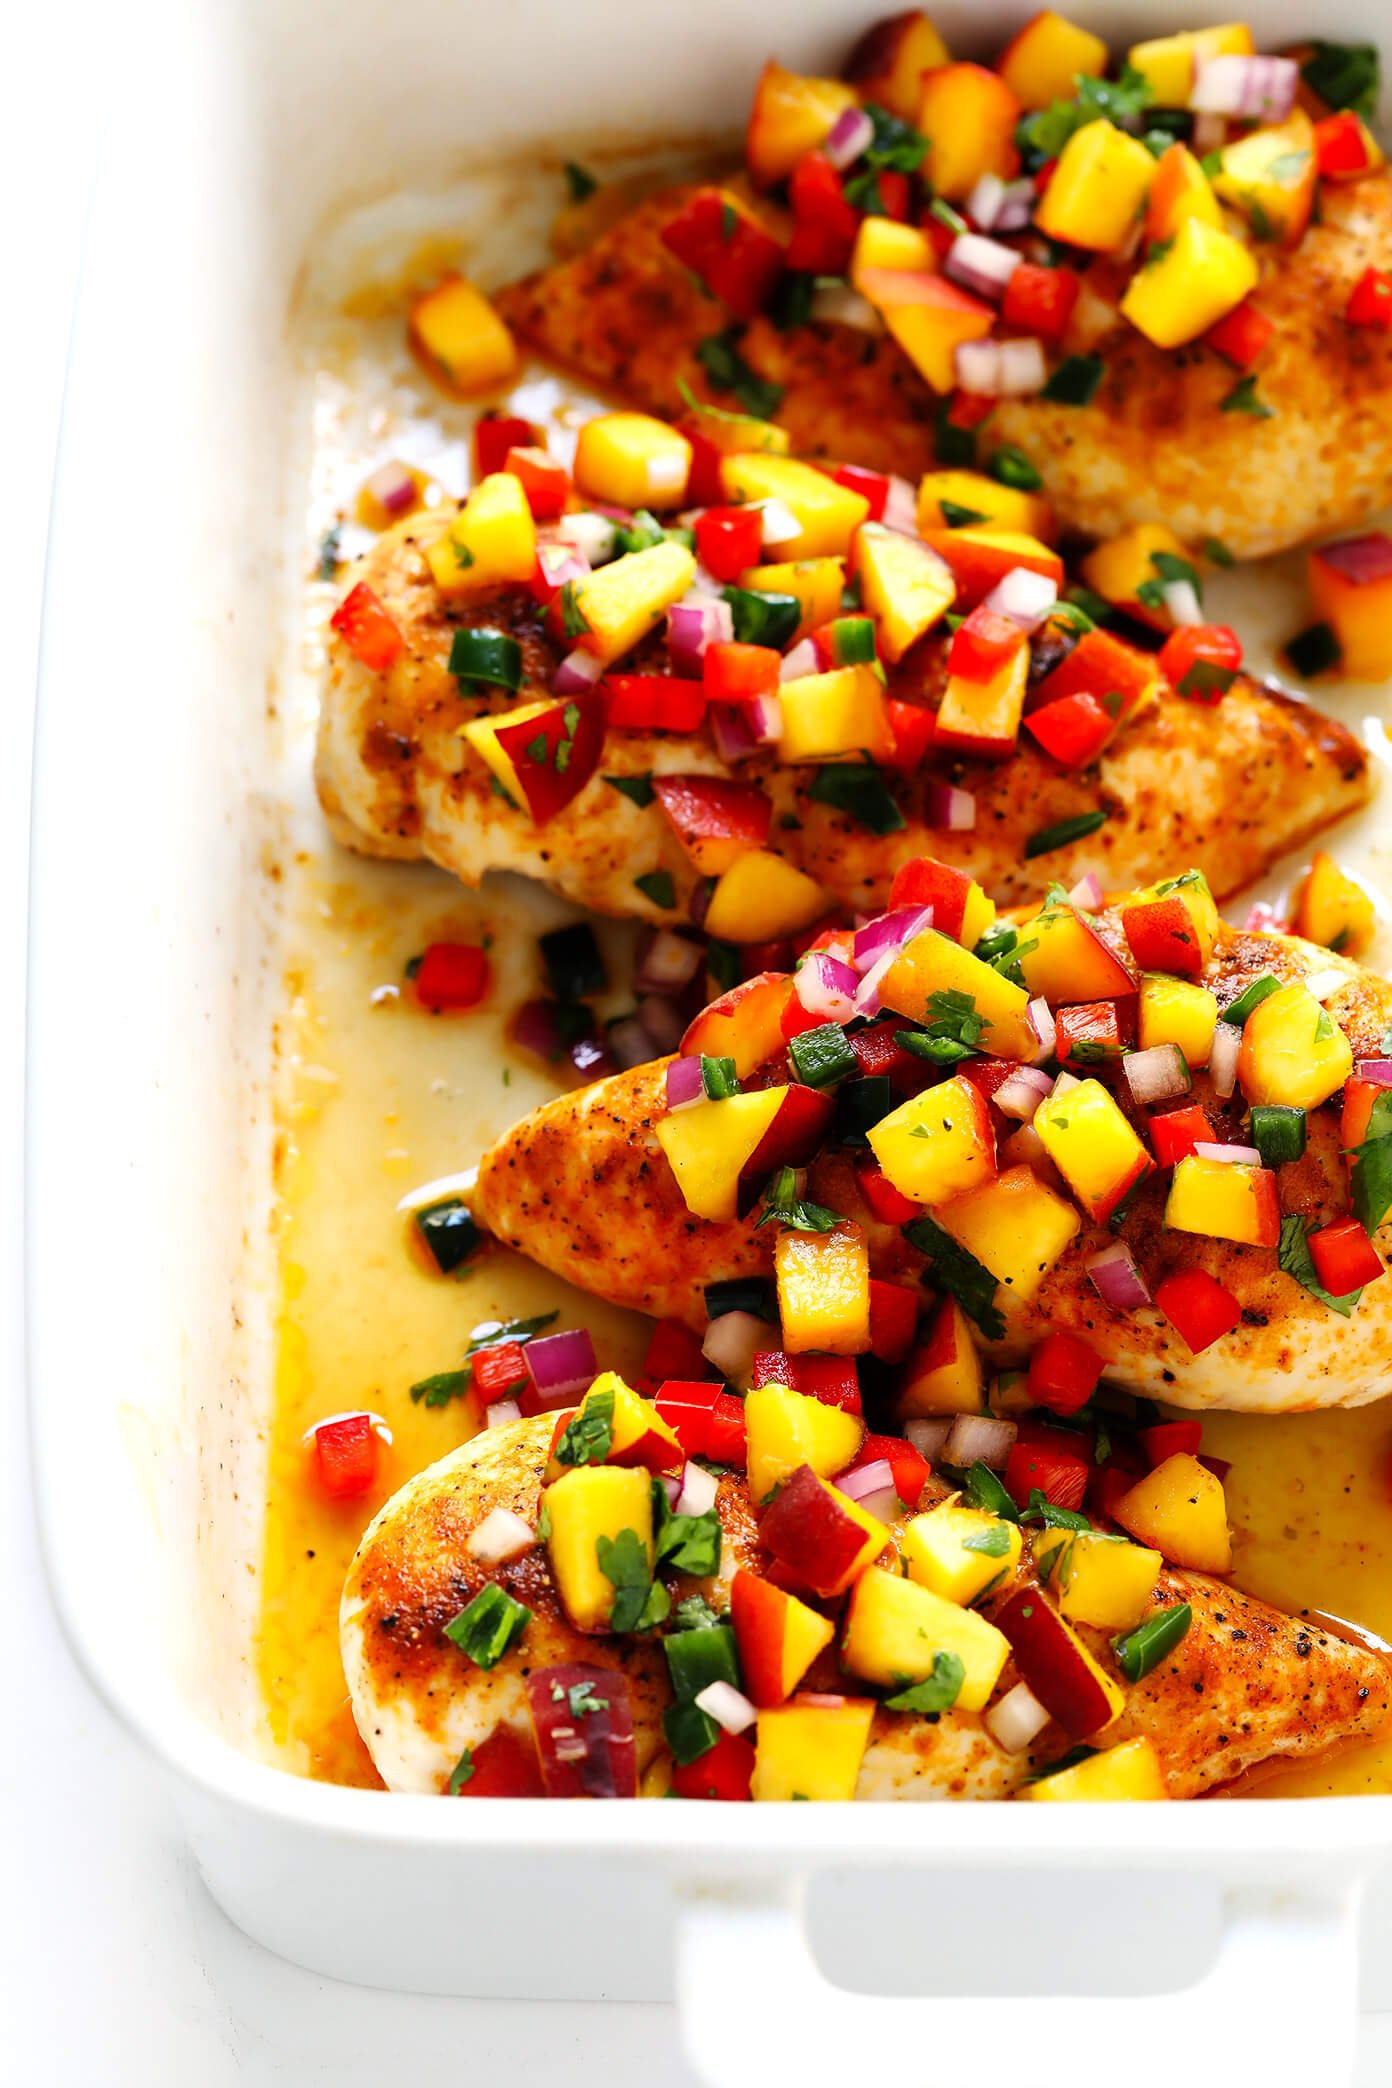 Ginger Baked Chicken Breasts with Fruit Salsa